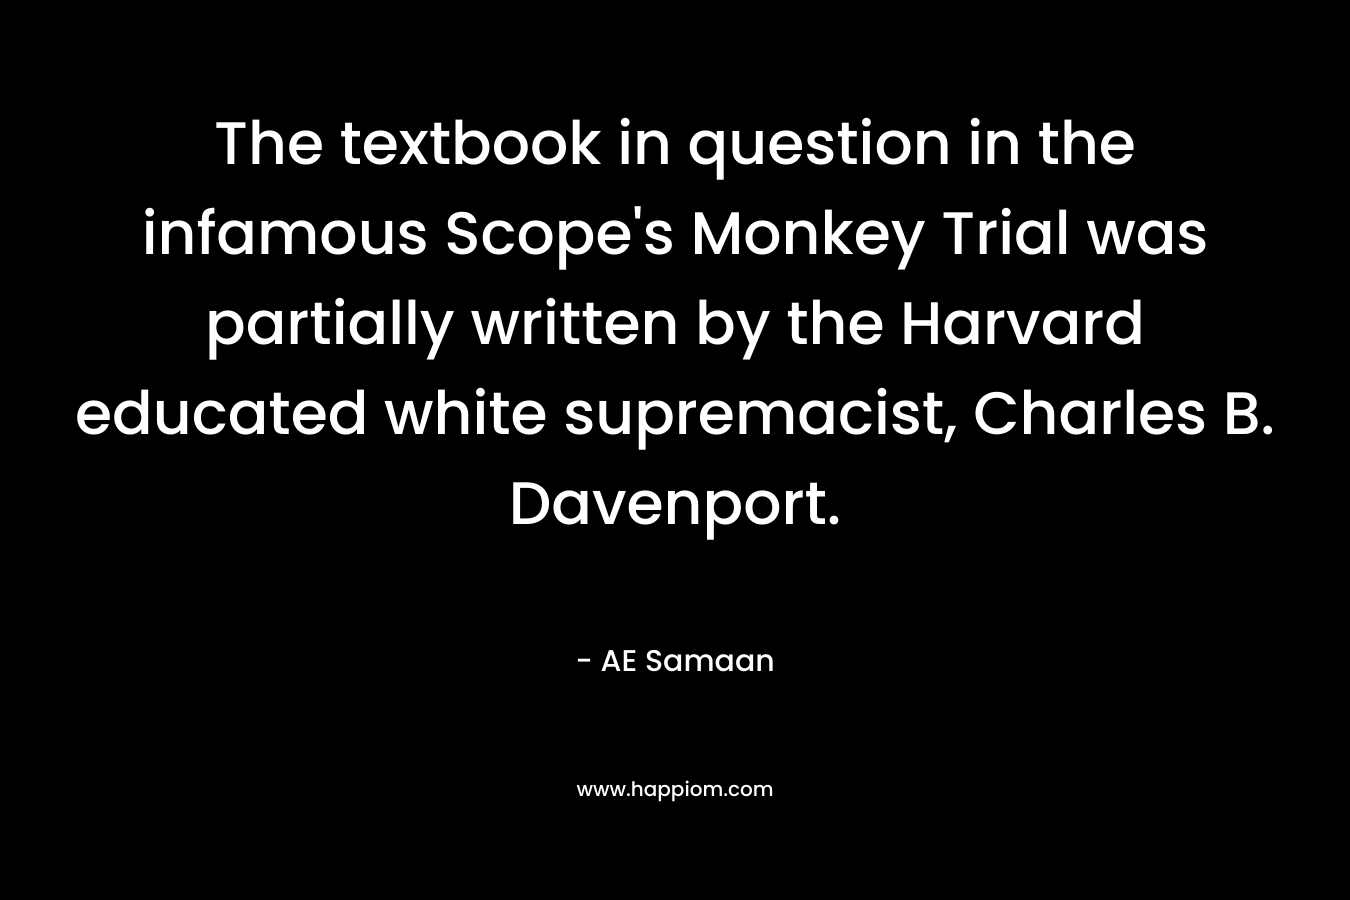 The textbook in question in the infamous Scope’s Monkey Trial was partially written by the Harvard educated white supremacist, Charles B. Davenport. – AE Samaan